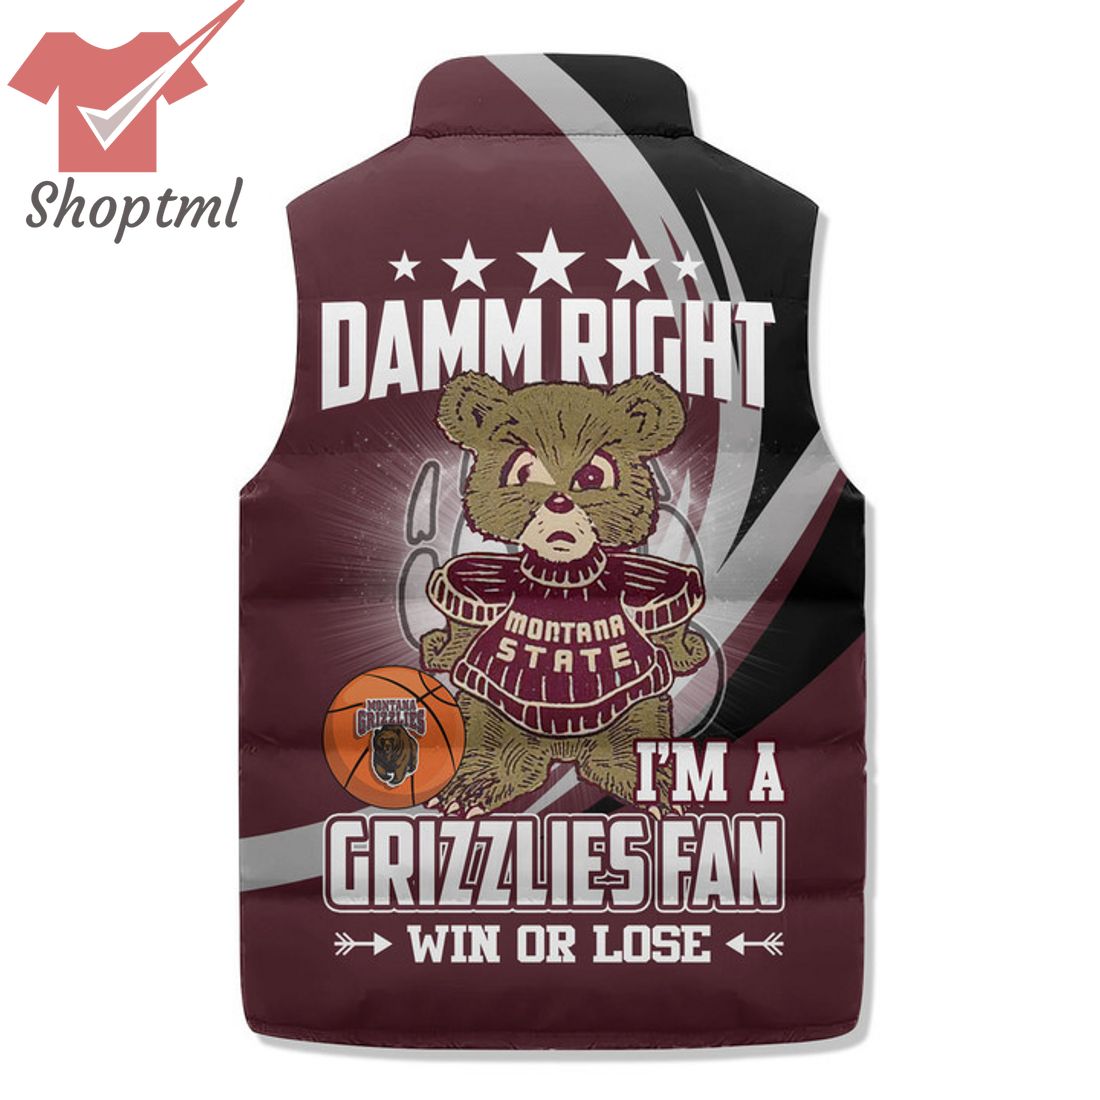 Montana Grizzlies Damn Right I'm A Grizzlies Fan Win Or Lose Puffer Sleeveless Jacket